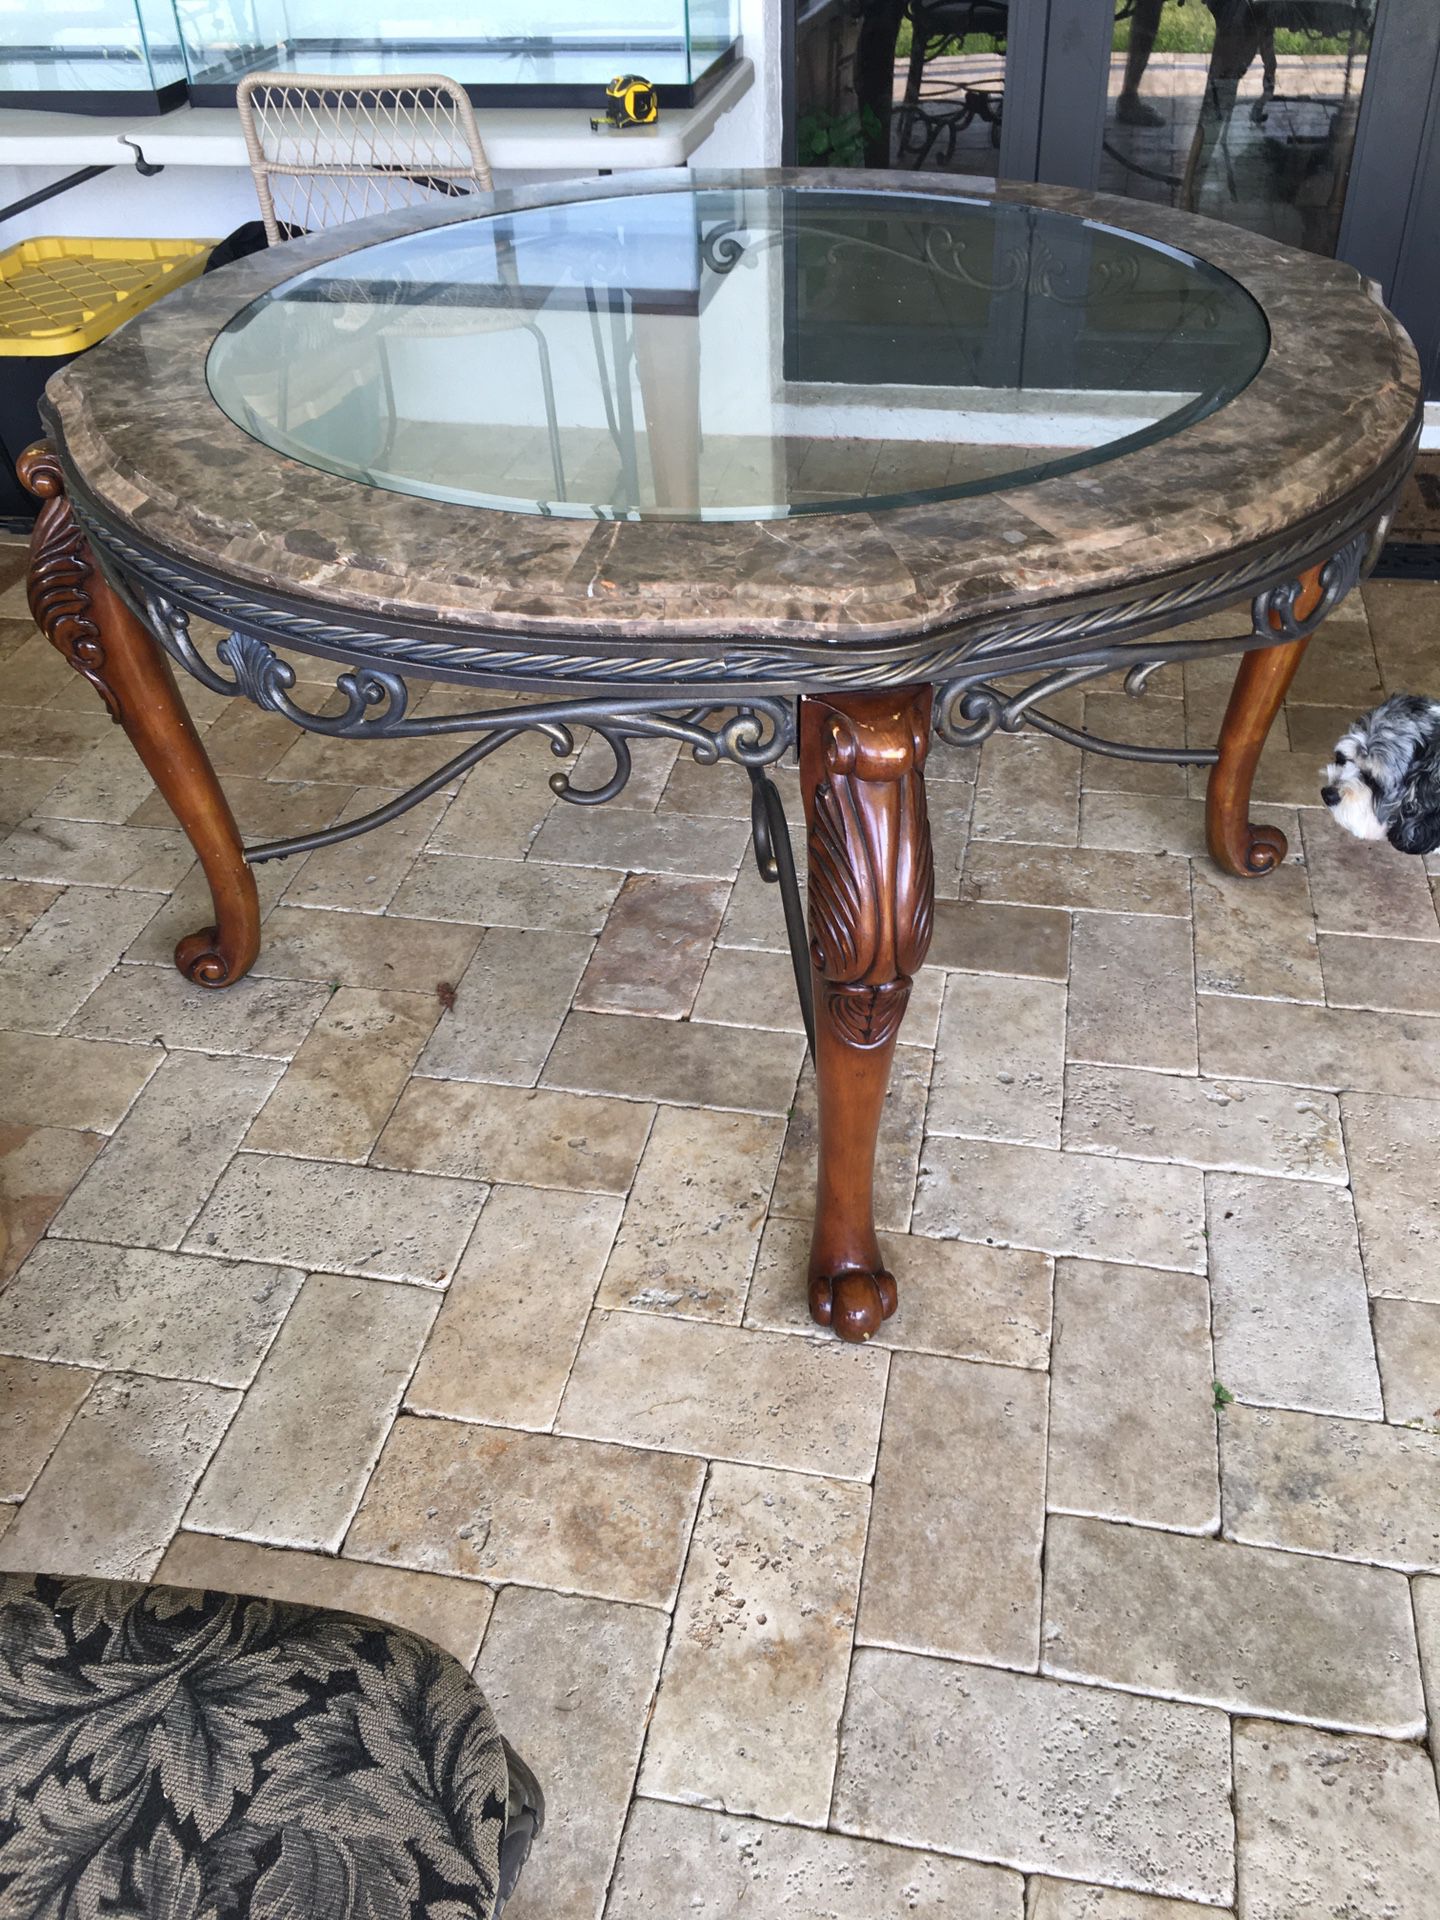 Round Glass Marble Table w/ Solid Wood Legs